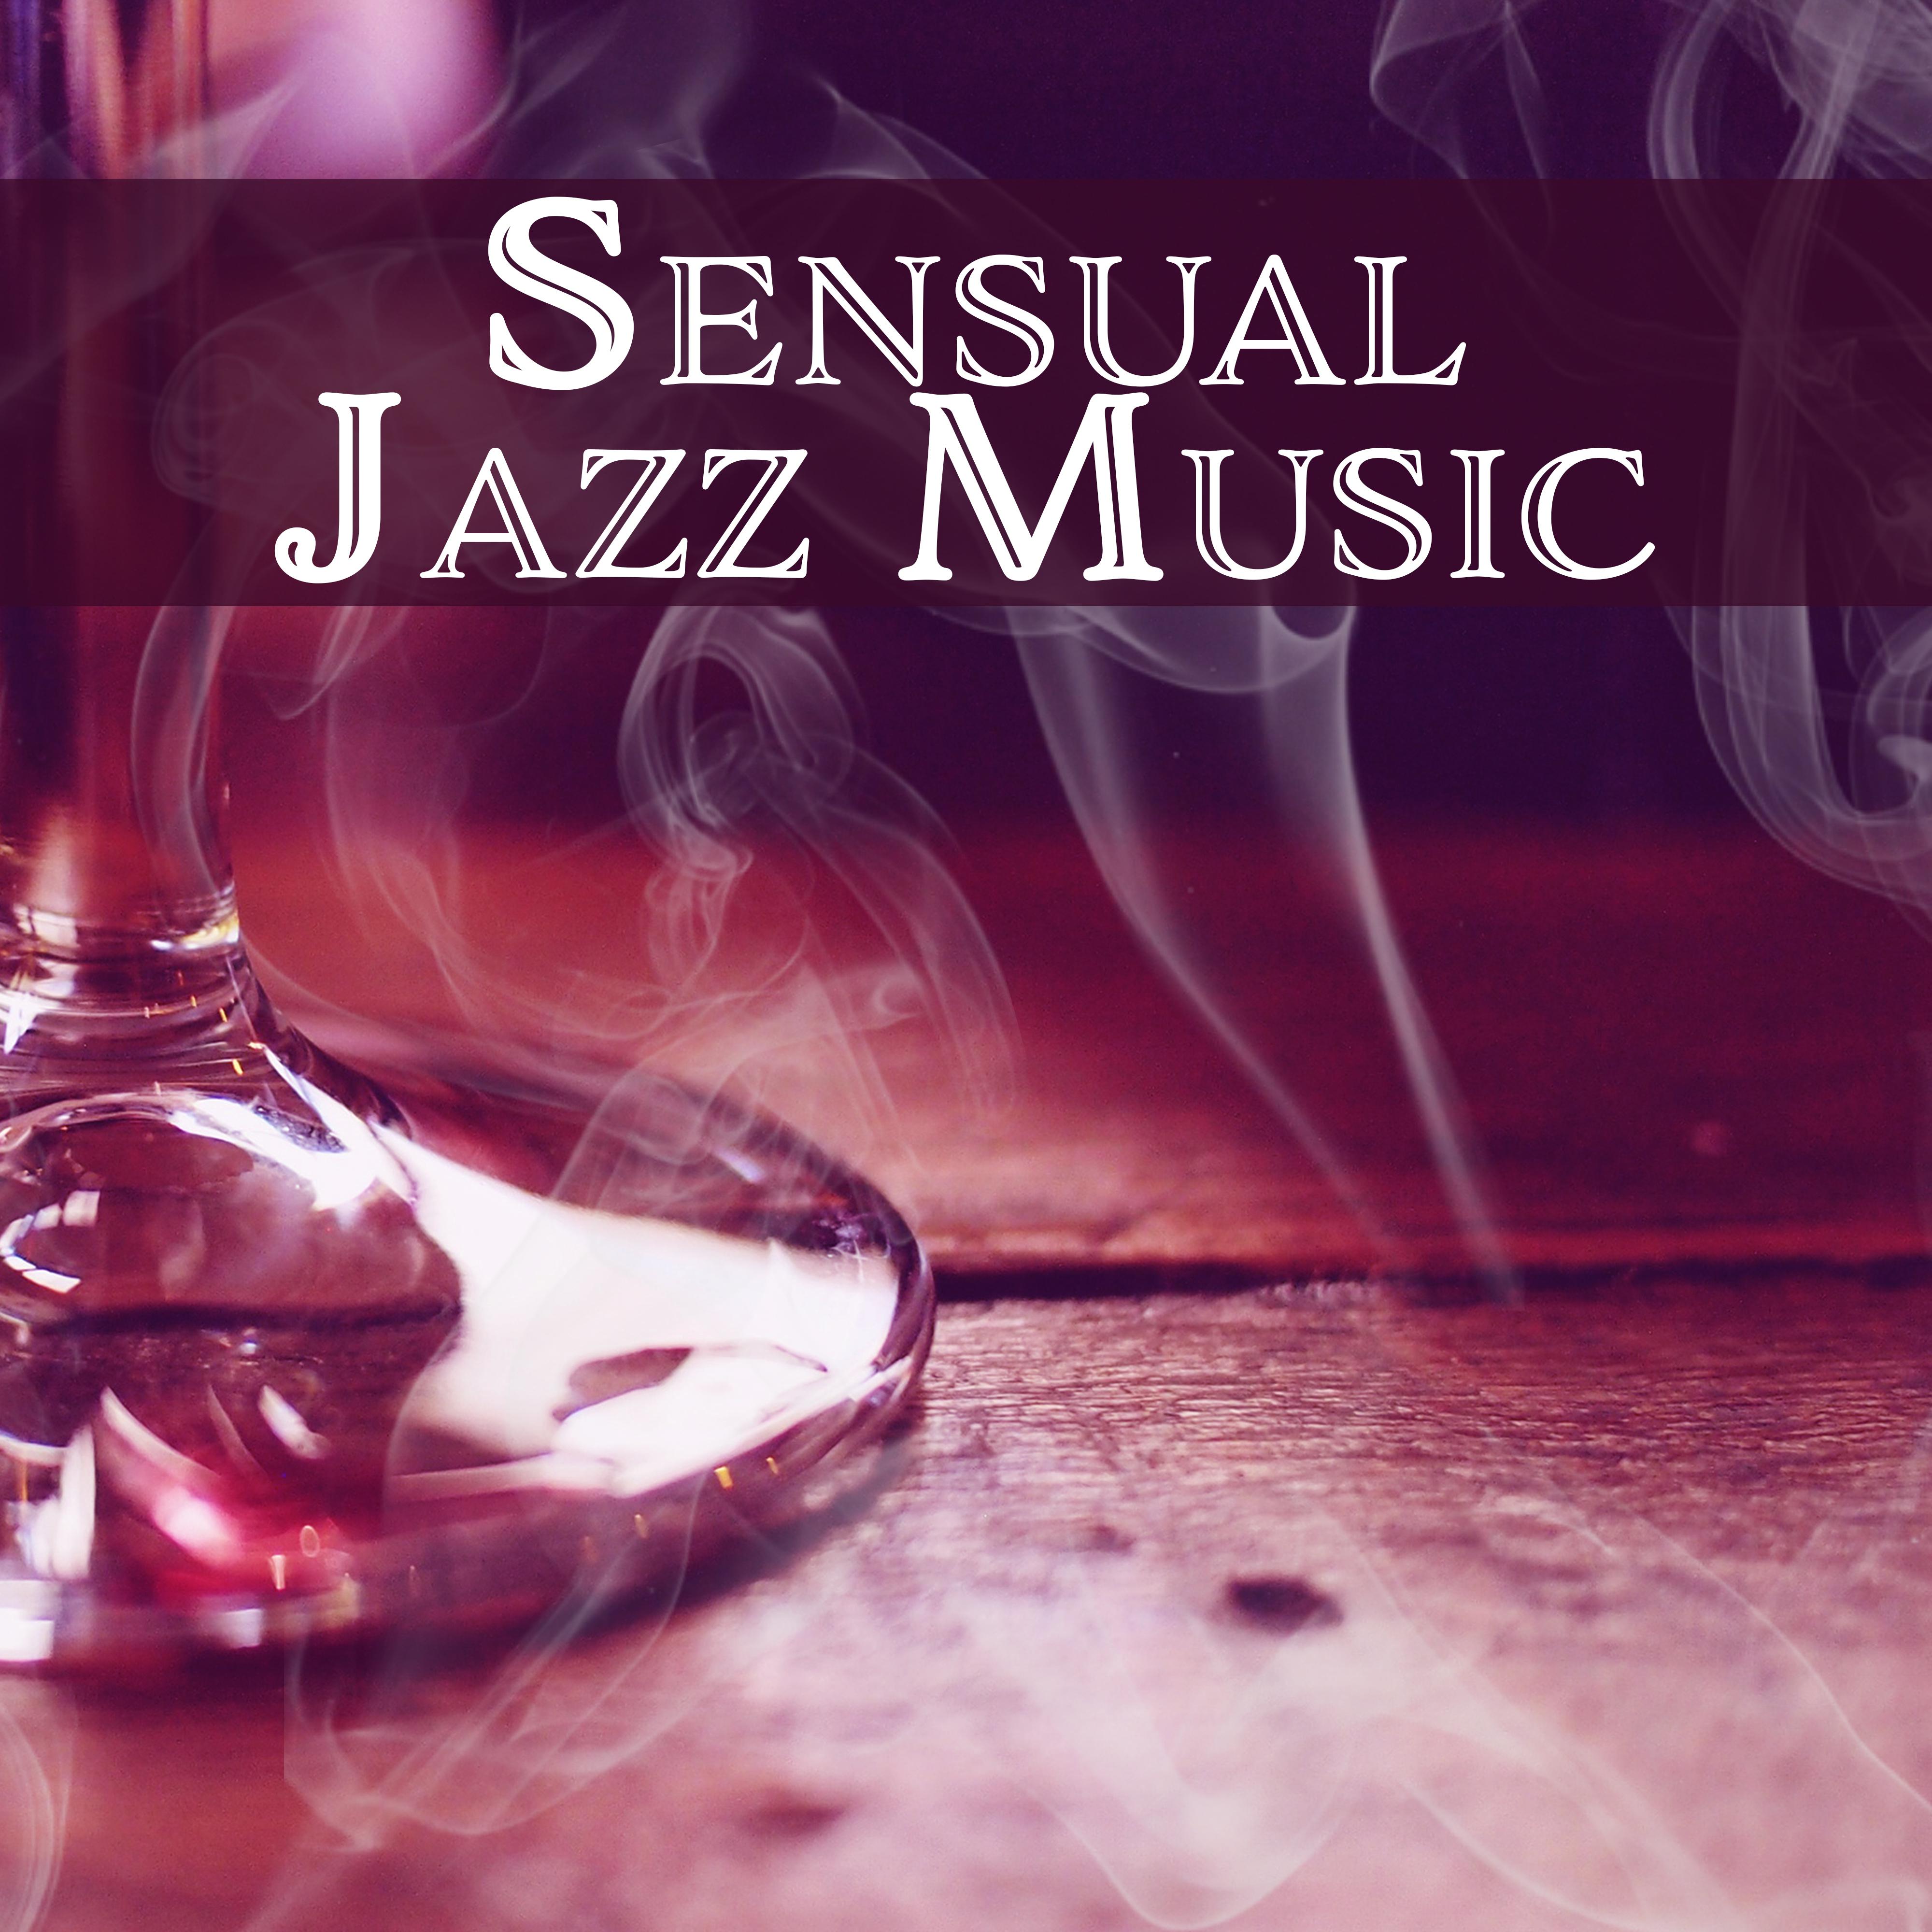 Sensual Jazz Music – Instrumental Sounds for Relaxation, Songs at Night, Smooth Jazz, Piano Music, Night Jazz